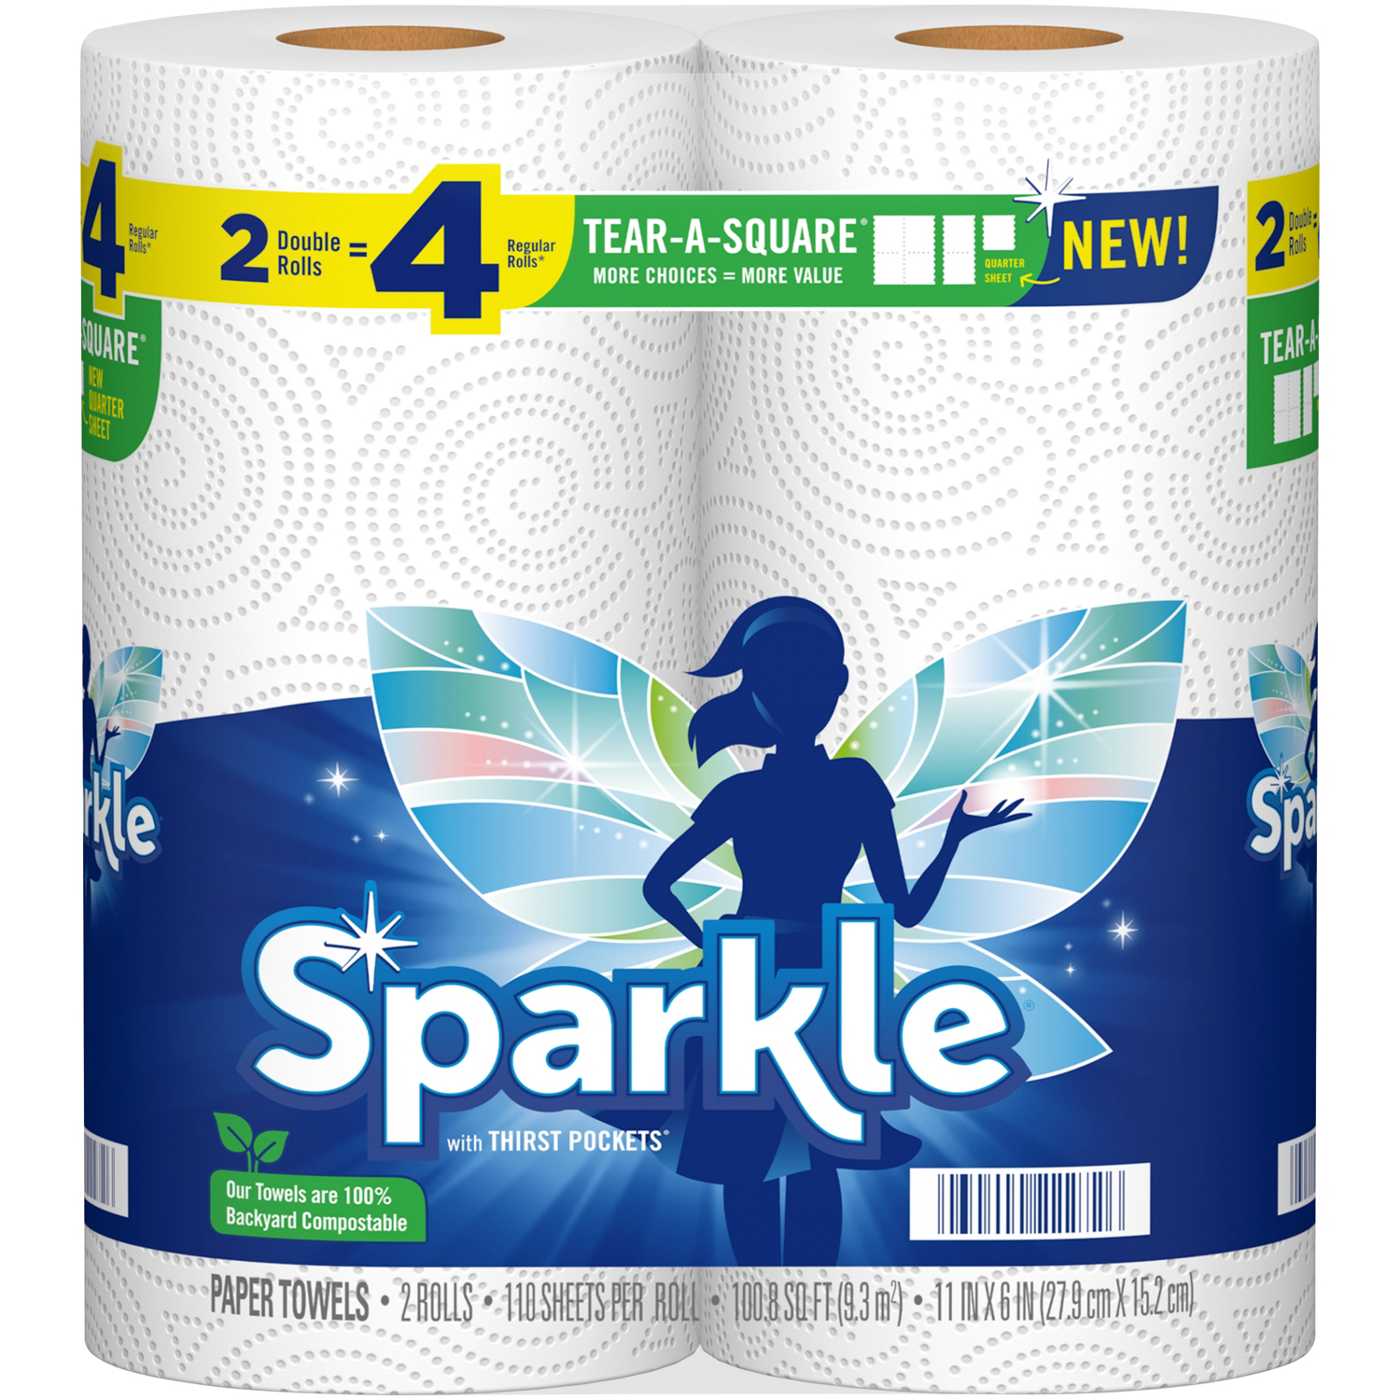 Sparkle Tear-A-Square Double Rolls Paper Towels with Thirst Pockets; image 1 of 2